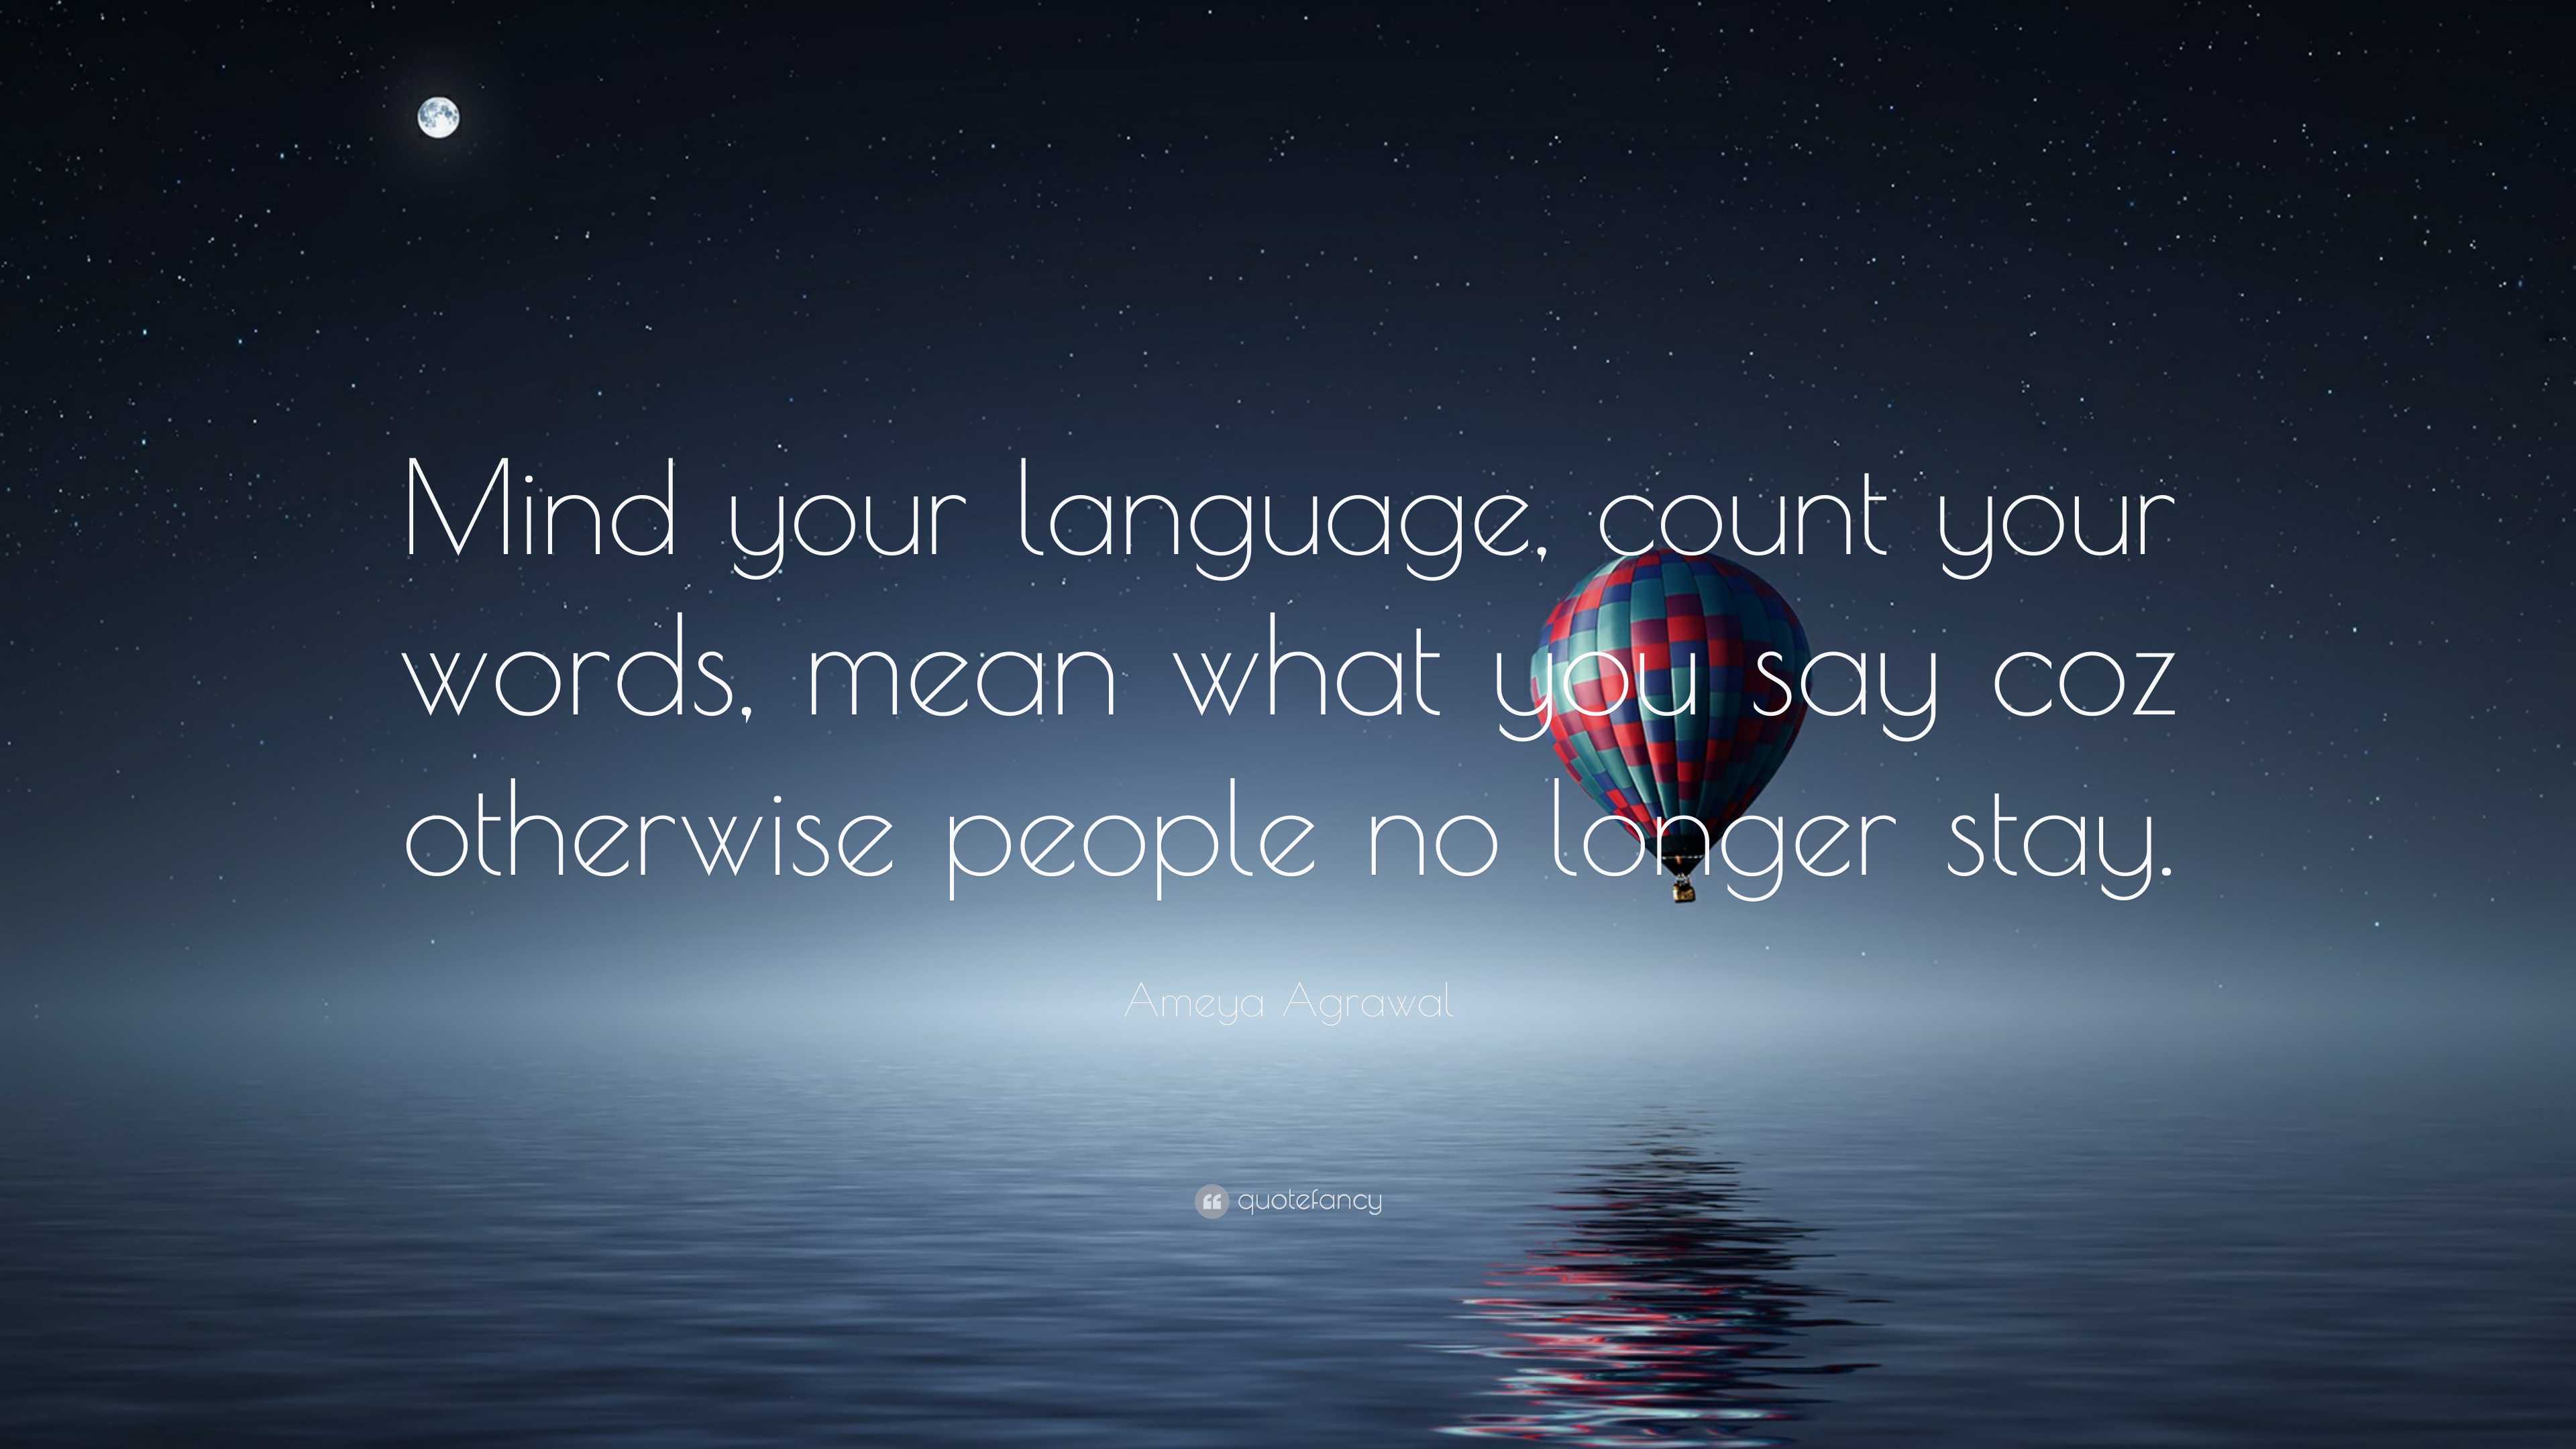 Ameya Agrawal Quote: “Mind your language, count your words, mean